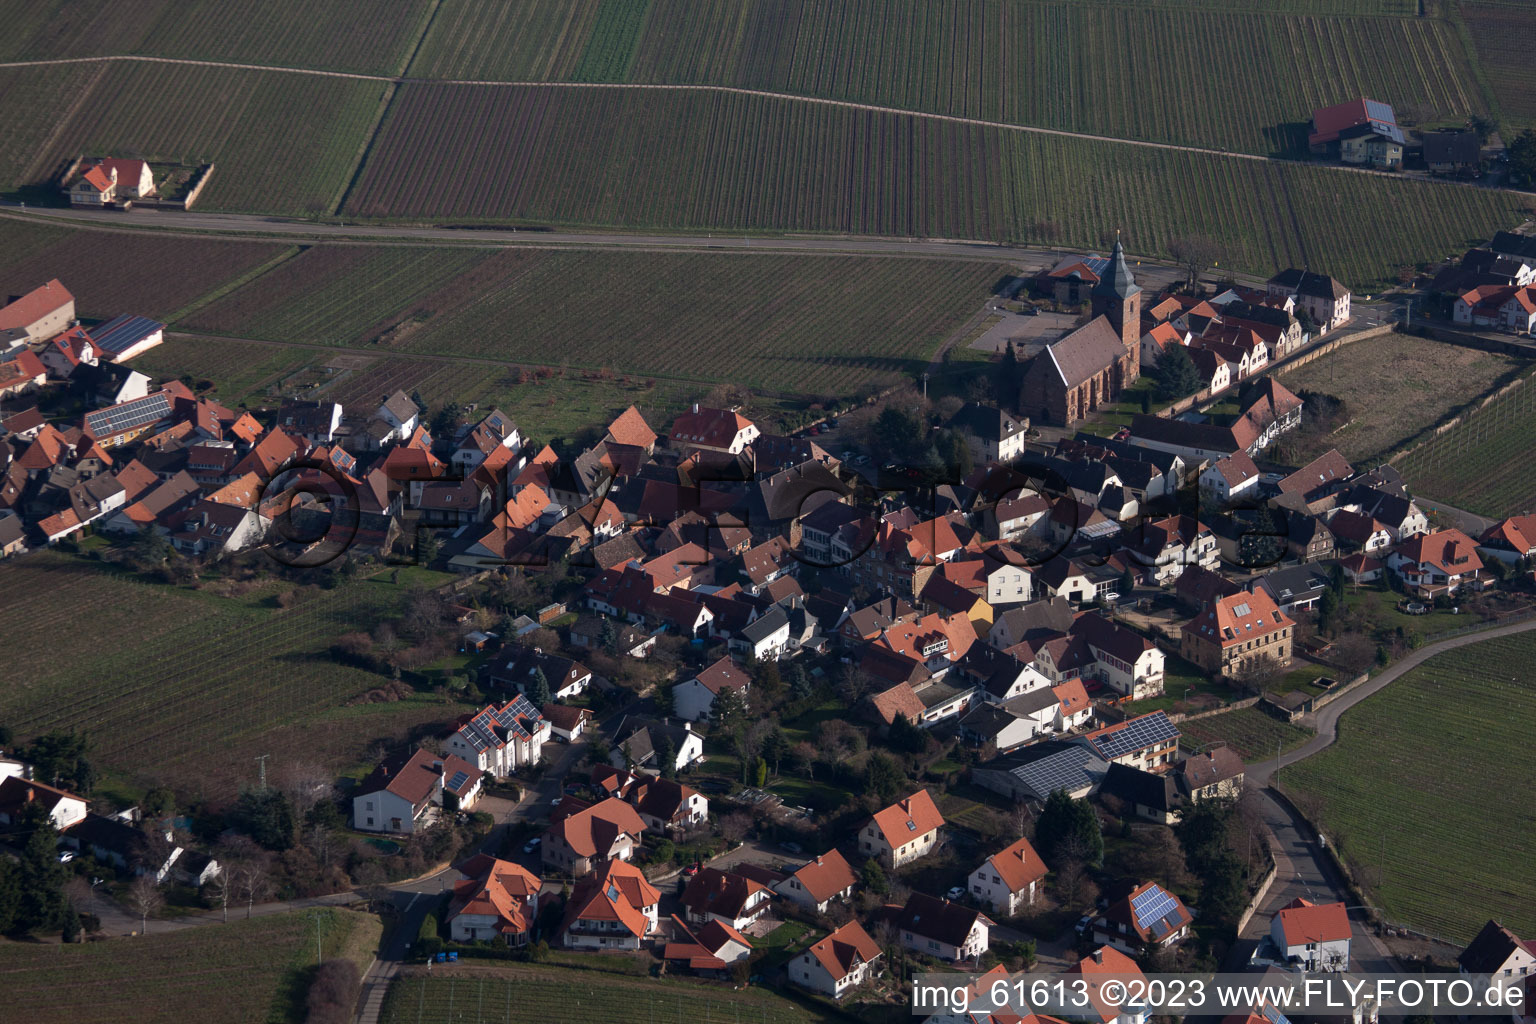 Gleisweiler in the state Rhineland-Palatinate, Germany from the drone perspective